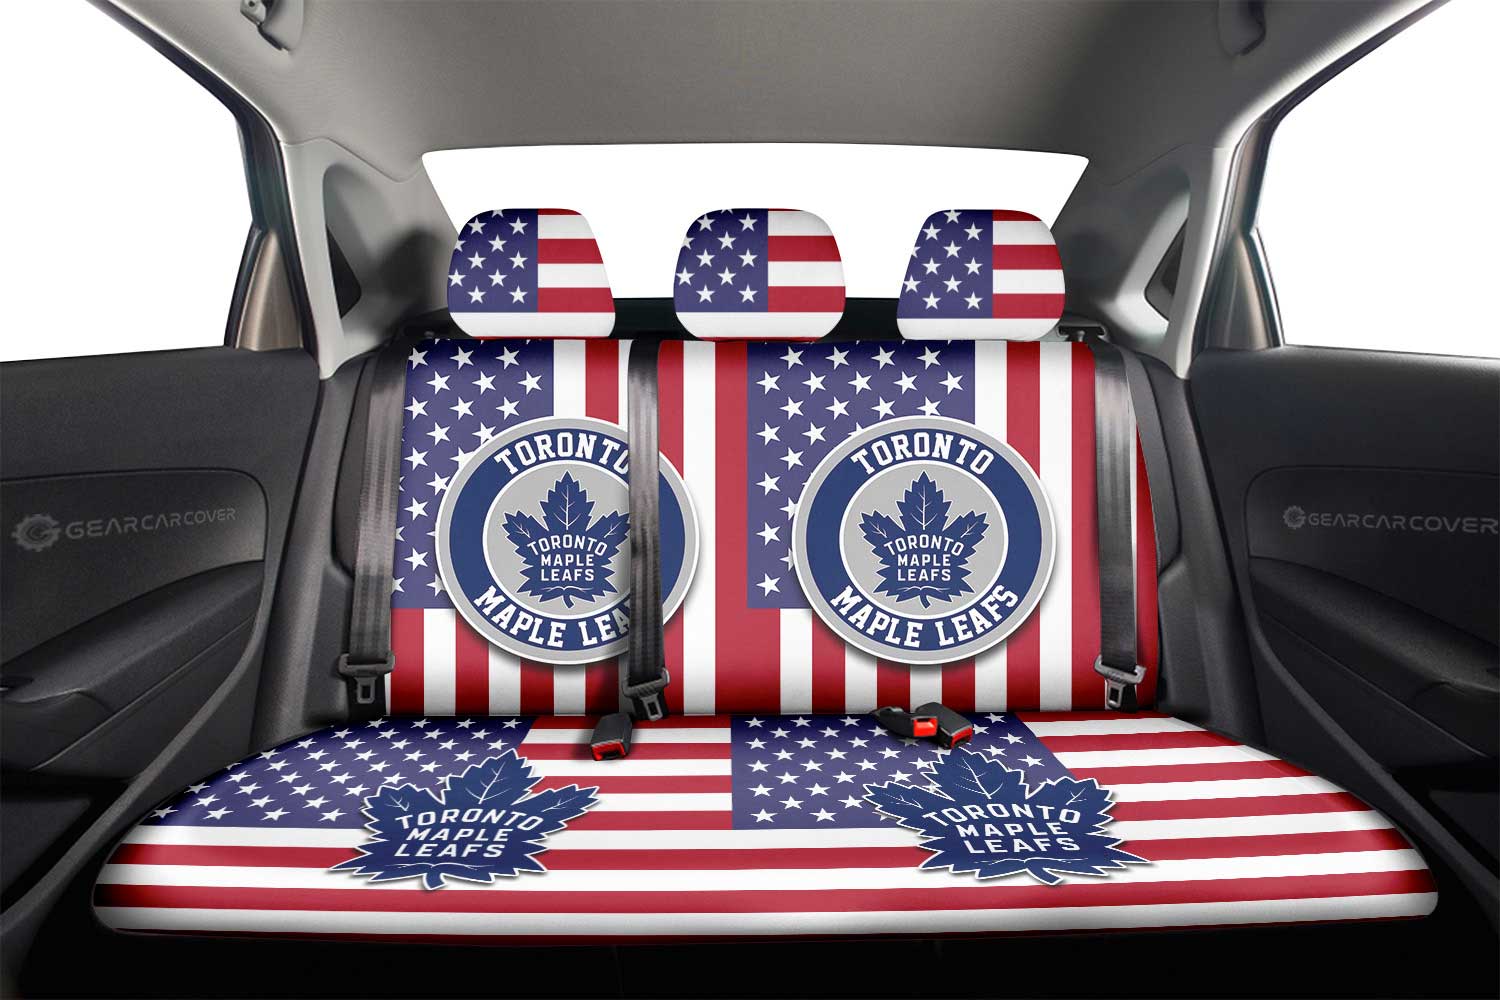 Toronto Maple Leafs Car Back Seat Cover Custom Car Accessories - Gearcarcover - 2